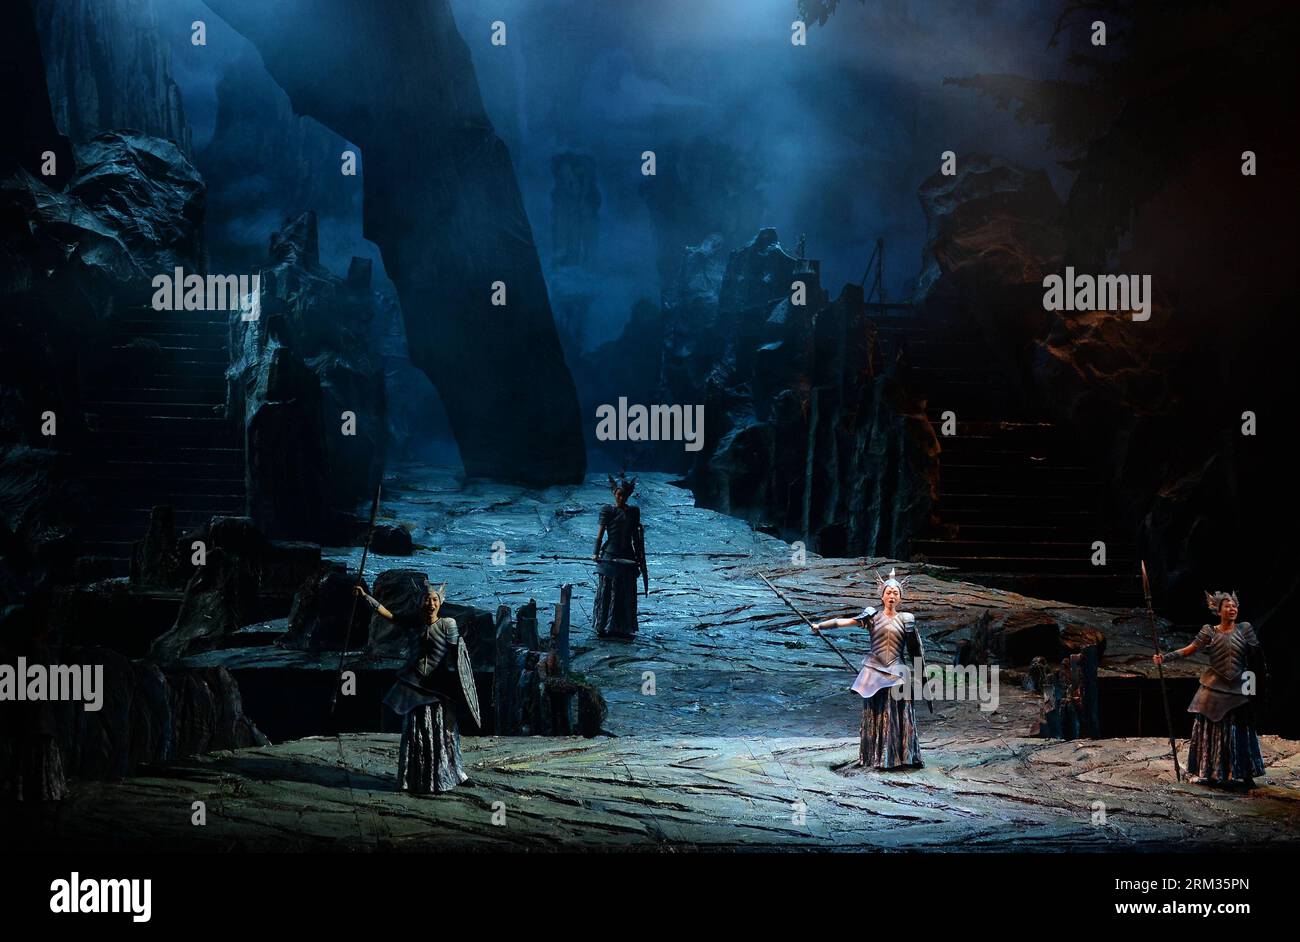 Bildnummer: 60030388  Datum: 06.07.2013  Copyright: imago/Xinhua Actors perform opera Die Walküre created by Richard Wagner at the National Centre for Performing Arts in Beijing, China, July 6, 2013. The opera was performed by China National Opera House to mark the 200th anniversary of Wagner s birth. (Xinhua/Jin Liangkuai) (hdt) CHINA-BEIJING-NCPA-PERFORMANCE (CN) PUBLICATIONxNOTxINxCHN Kultur Oper xas x0x 2013 quer     60030388 Date 06 07 2013 Copyright Imago XINHUA Actors perform Opera the Walküre Created by Richard Wagner AT The National Centre for Performing Arts in Beijing China July 6 2 Stock Photo